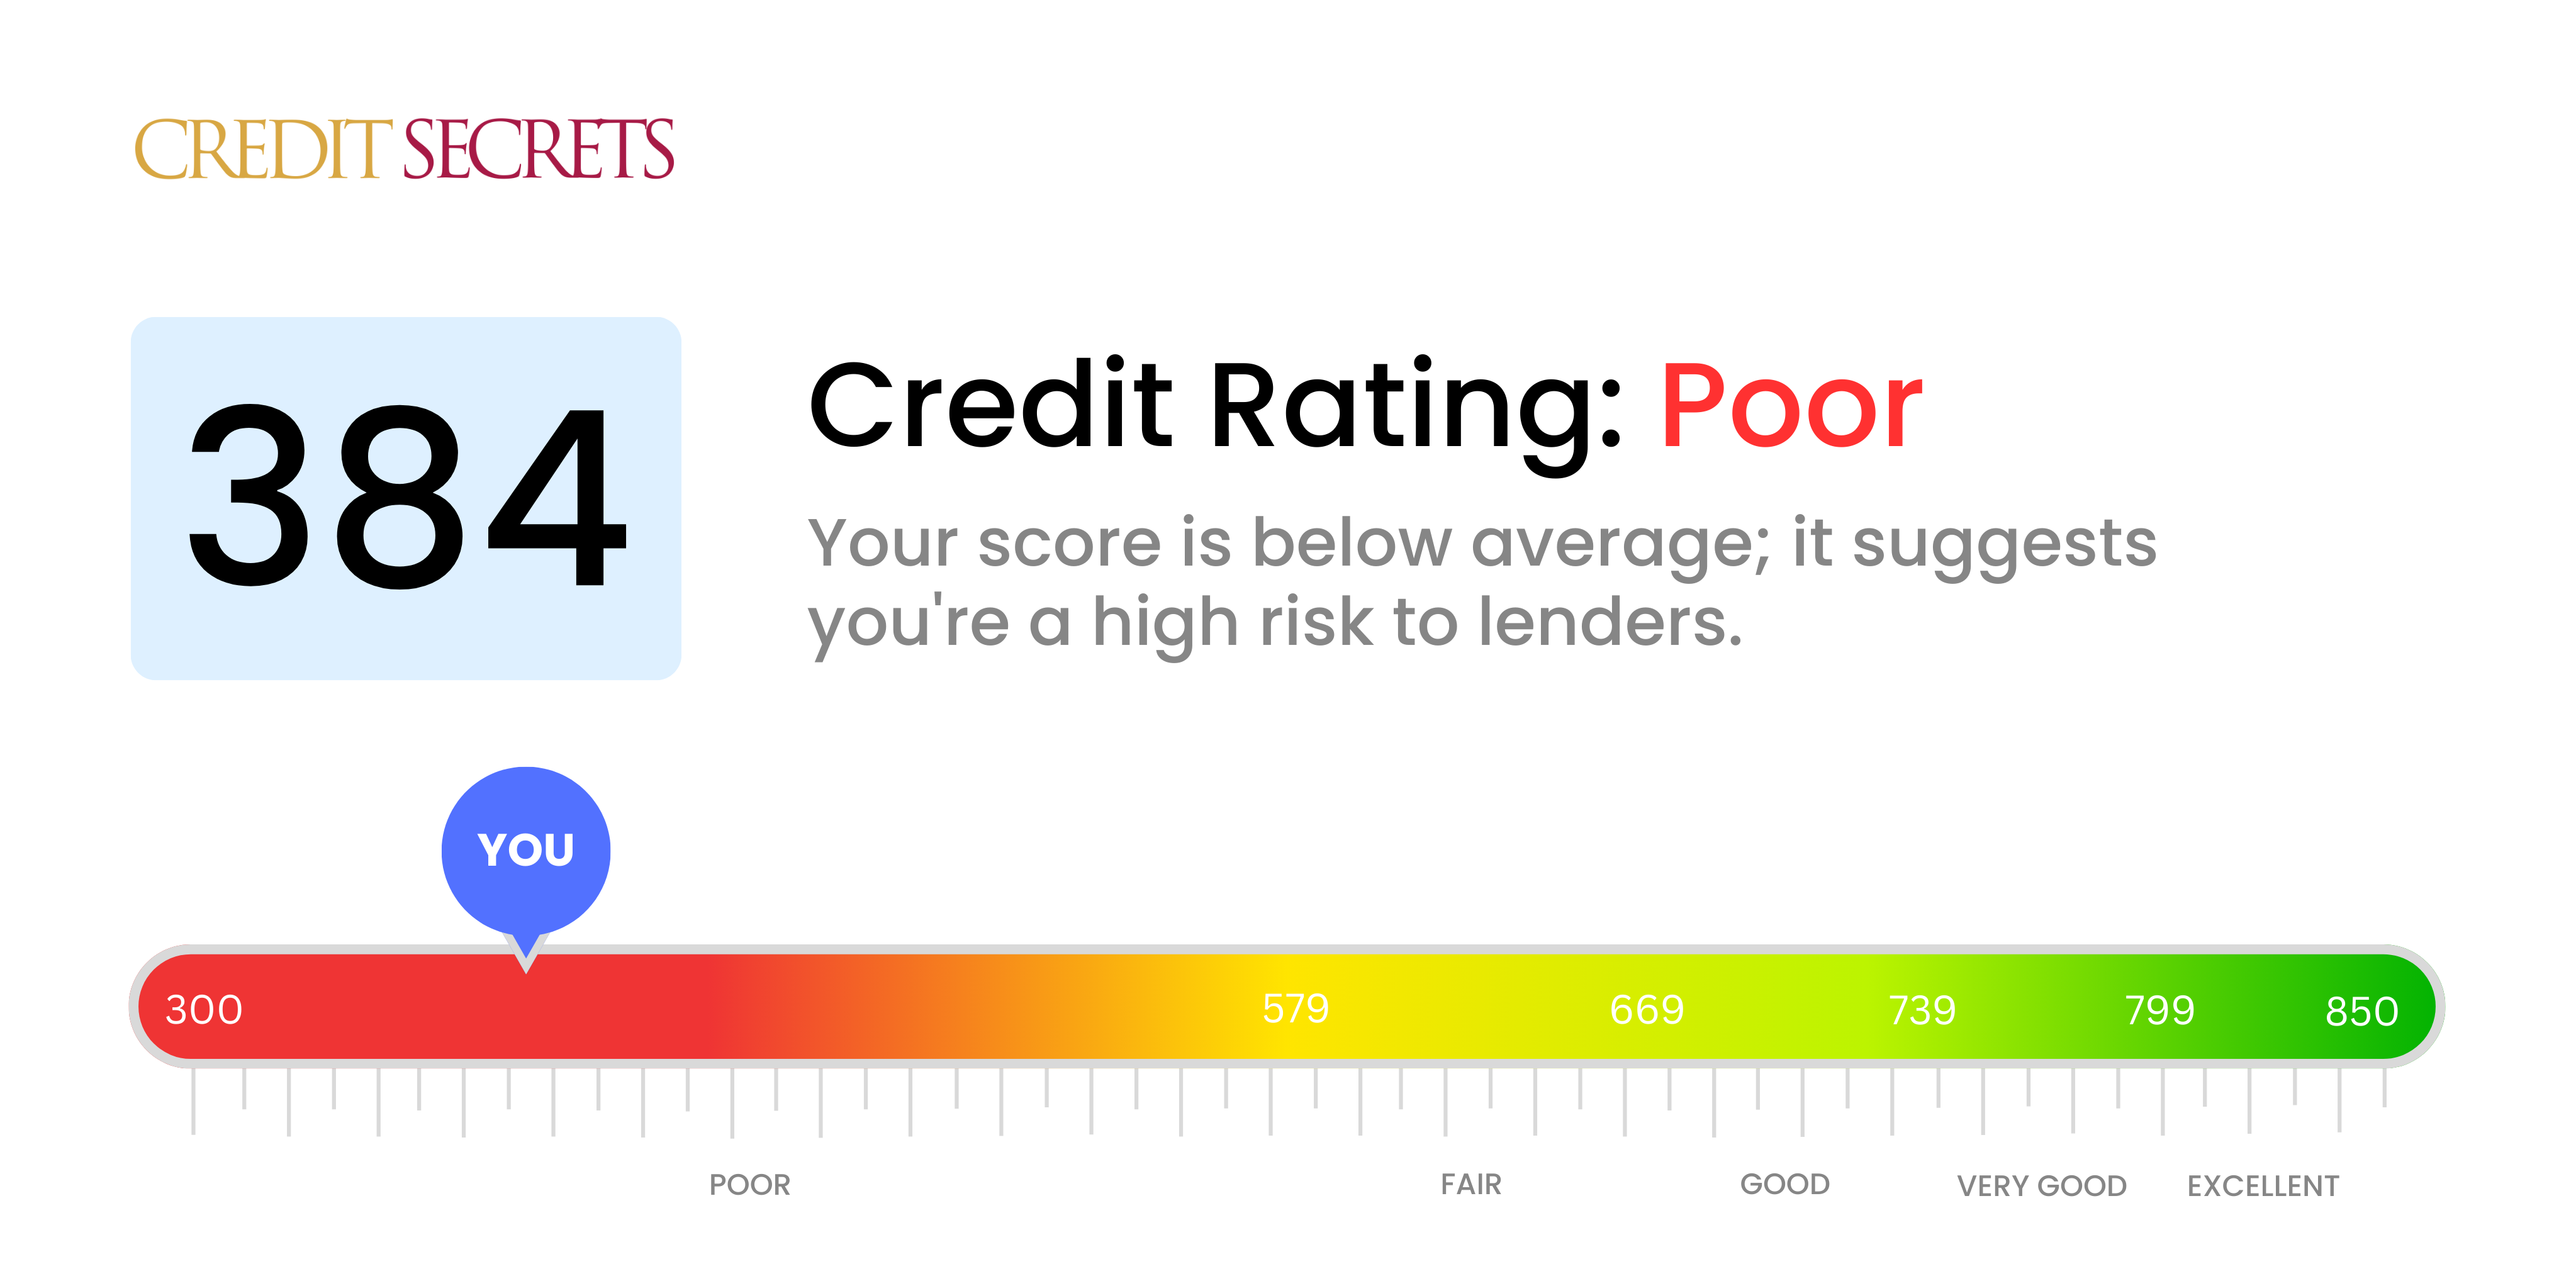 Is 384 a good credit score?